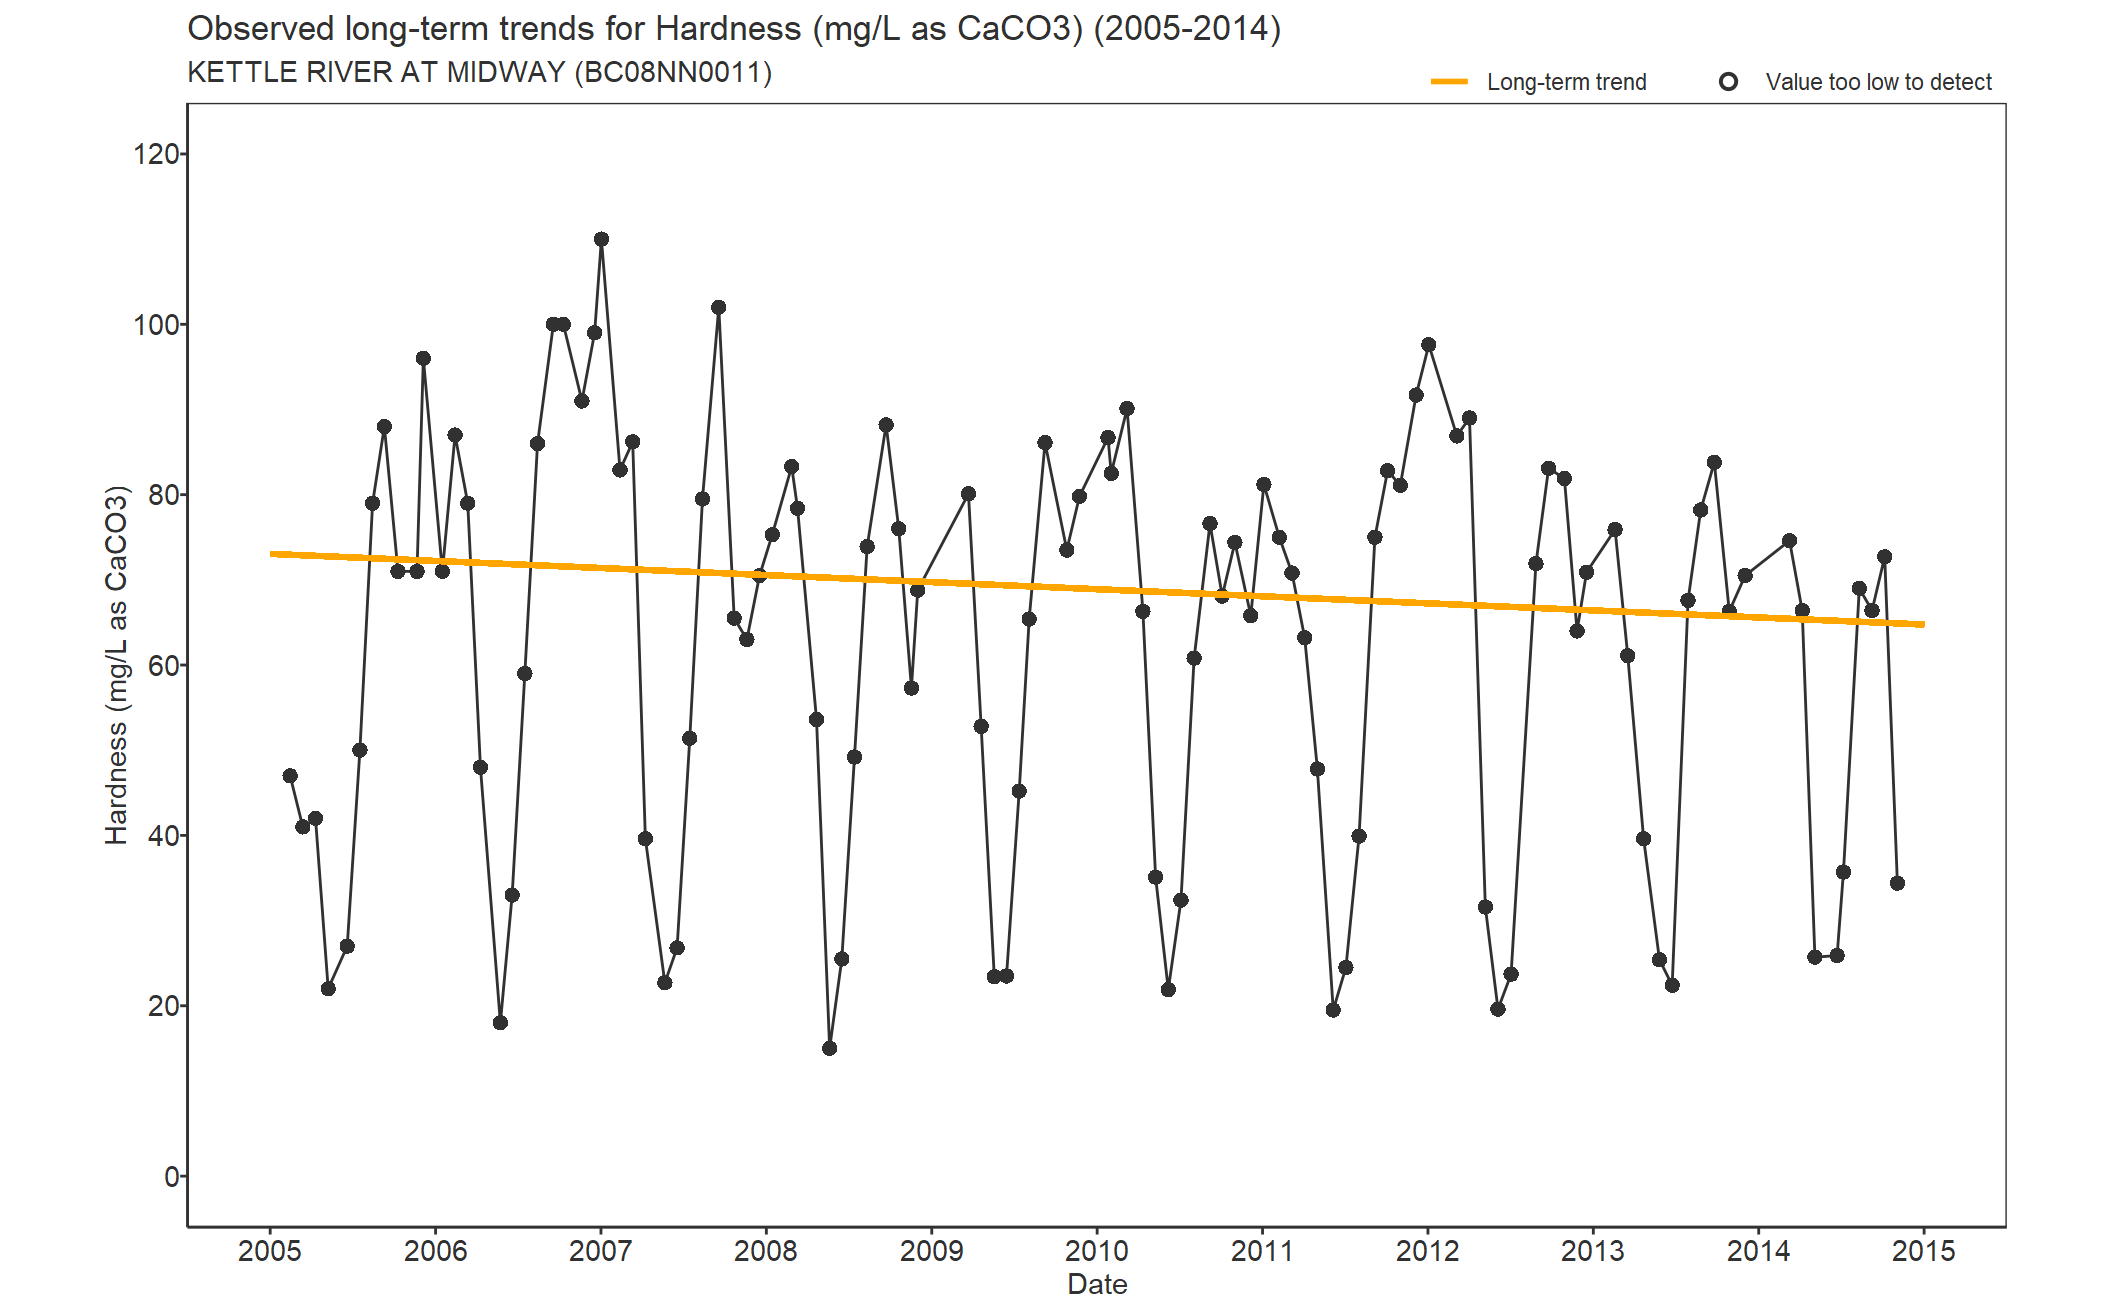 Observed long-term trends for Hardness Total CaCO3 (2005-2014)